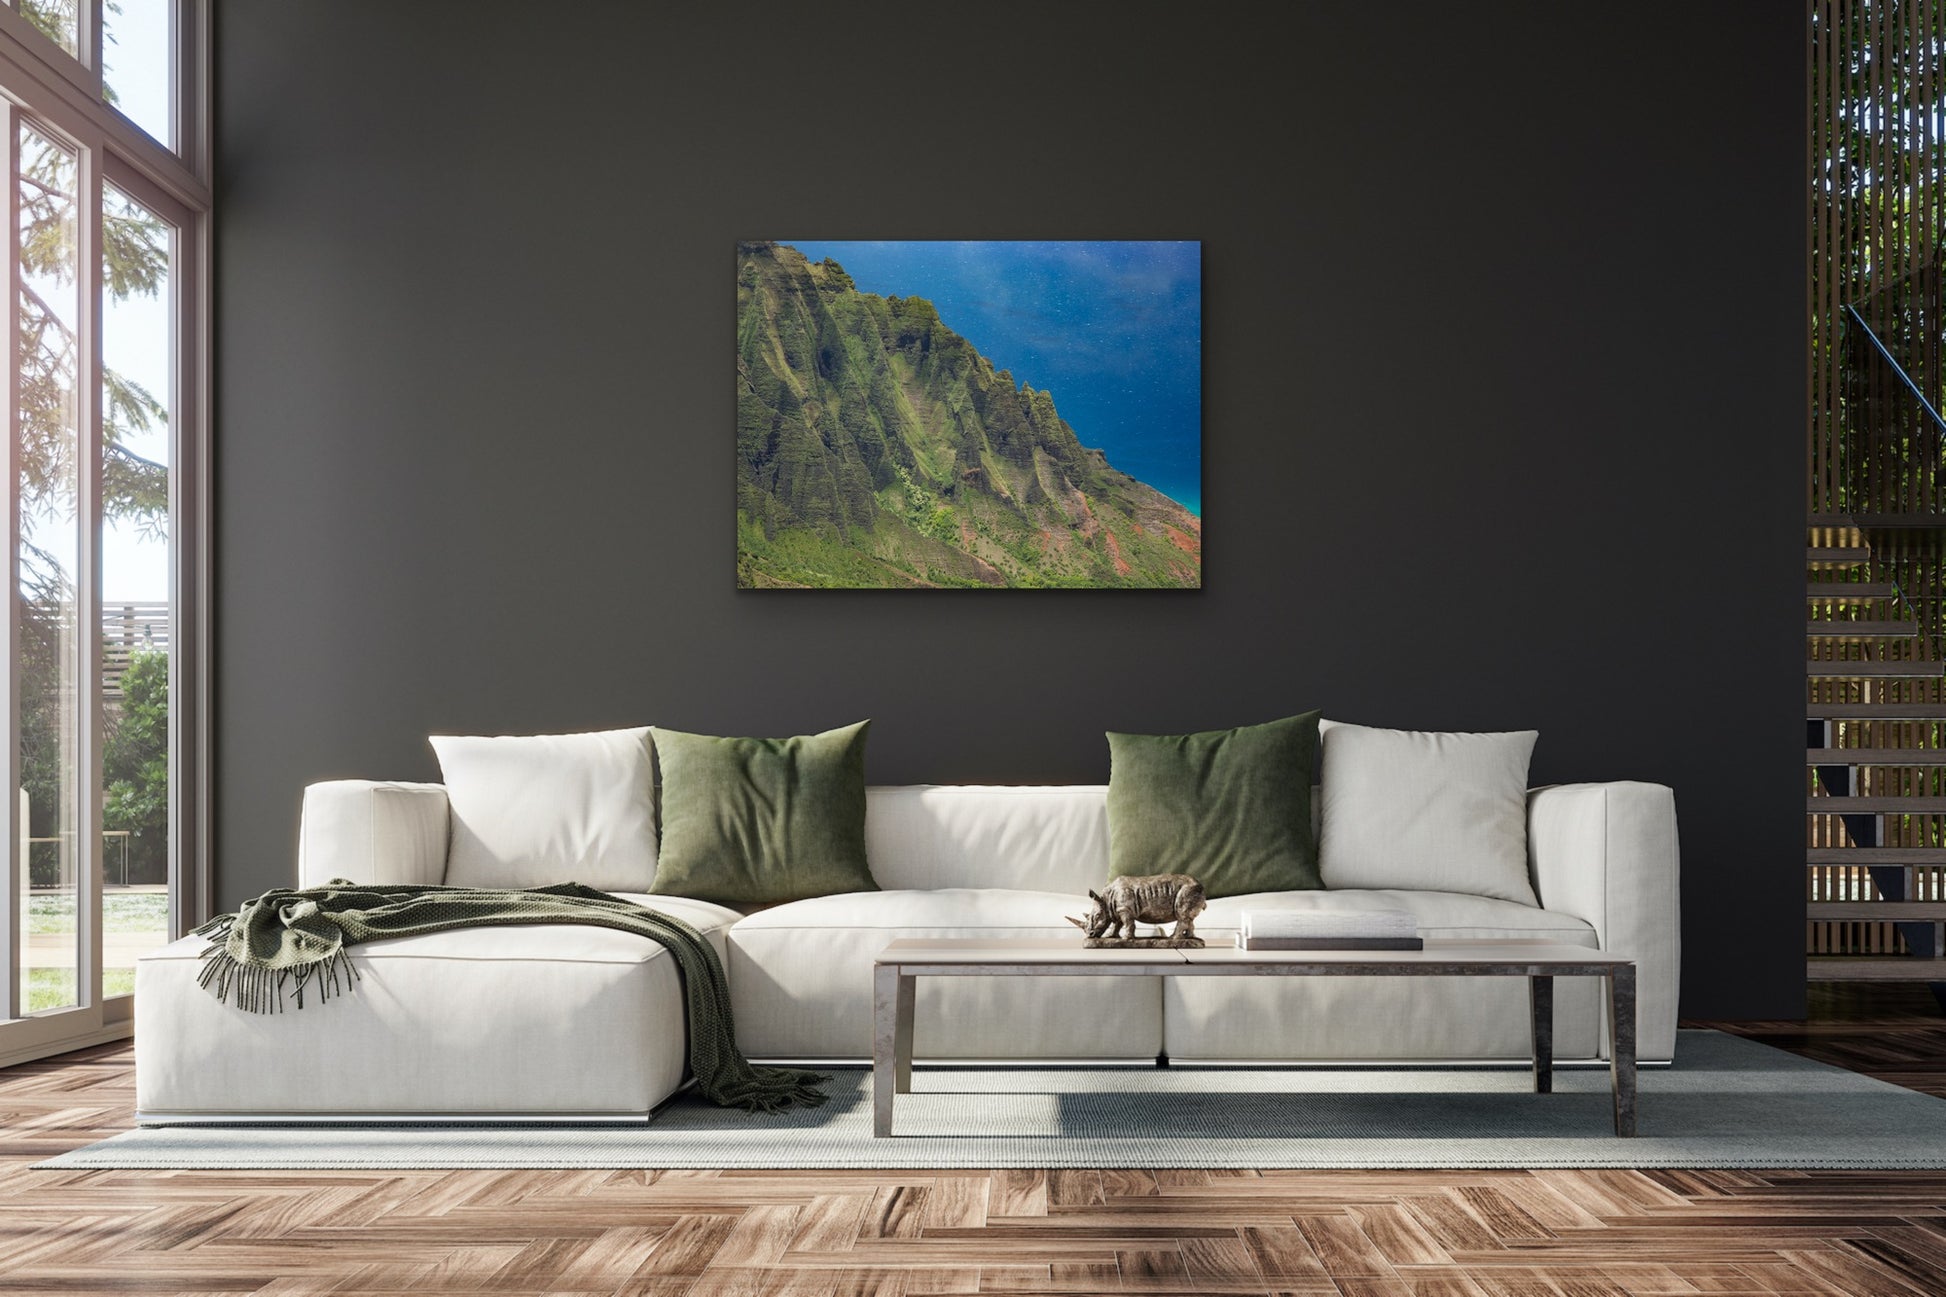 Wall demo of Cathedral Profile, a close up fine art photograph of Kauai’s Kalalau Valley cliffs by Inspiring Images Hawaii.